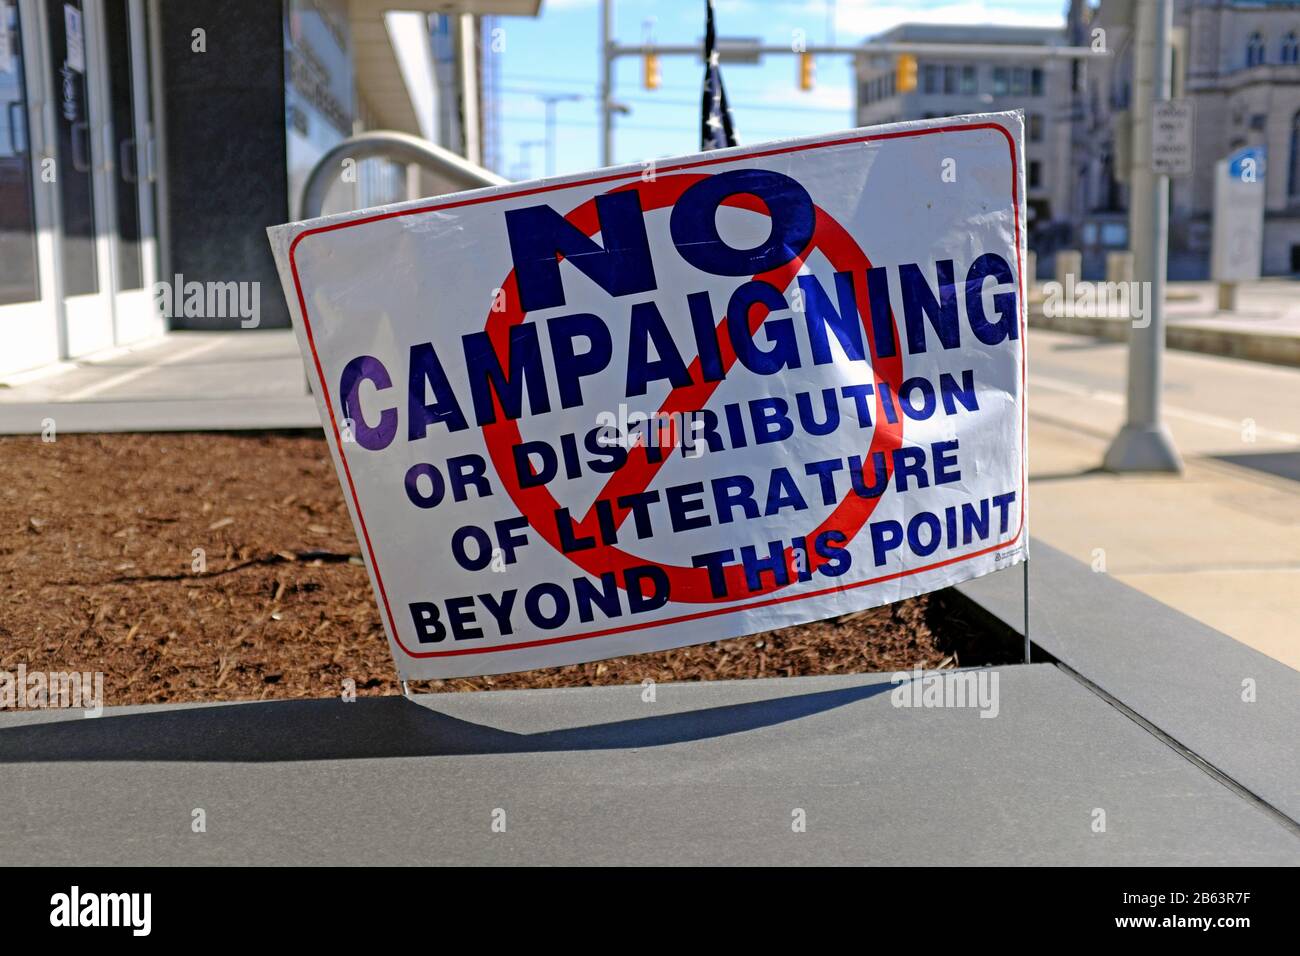 A sign outside the Cuyahoga County Board of  Elections in downtown Cleveland, Ohio warns no campaigning or distribution of literature allowed. Stock Photo